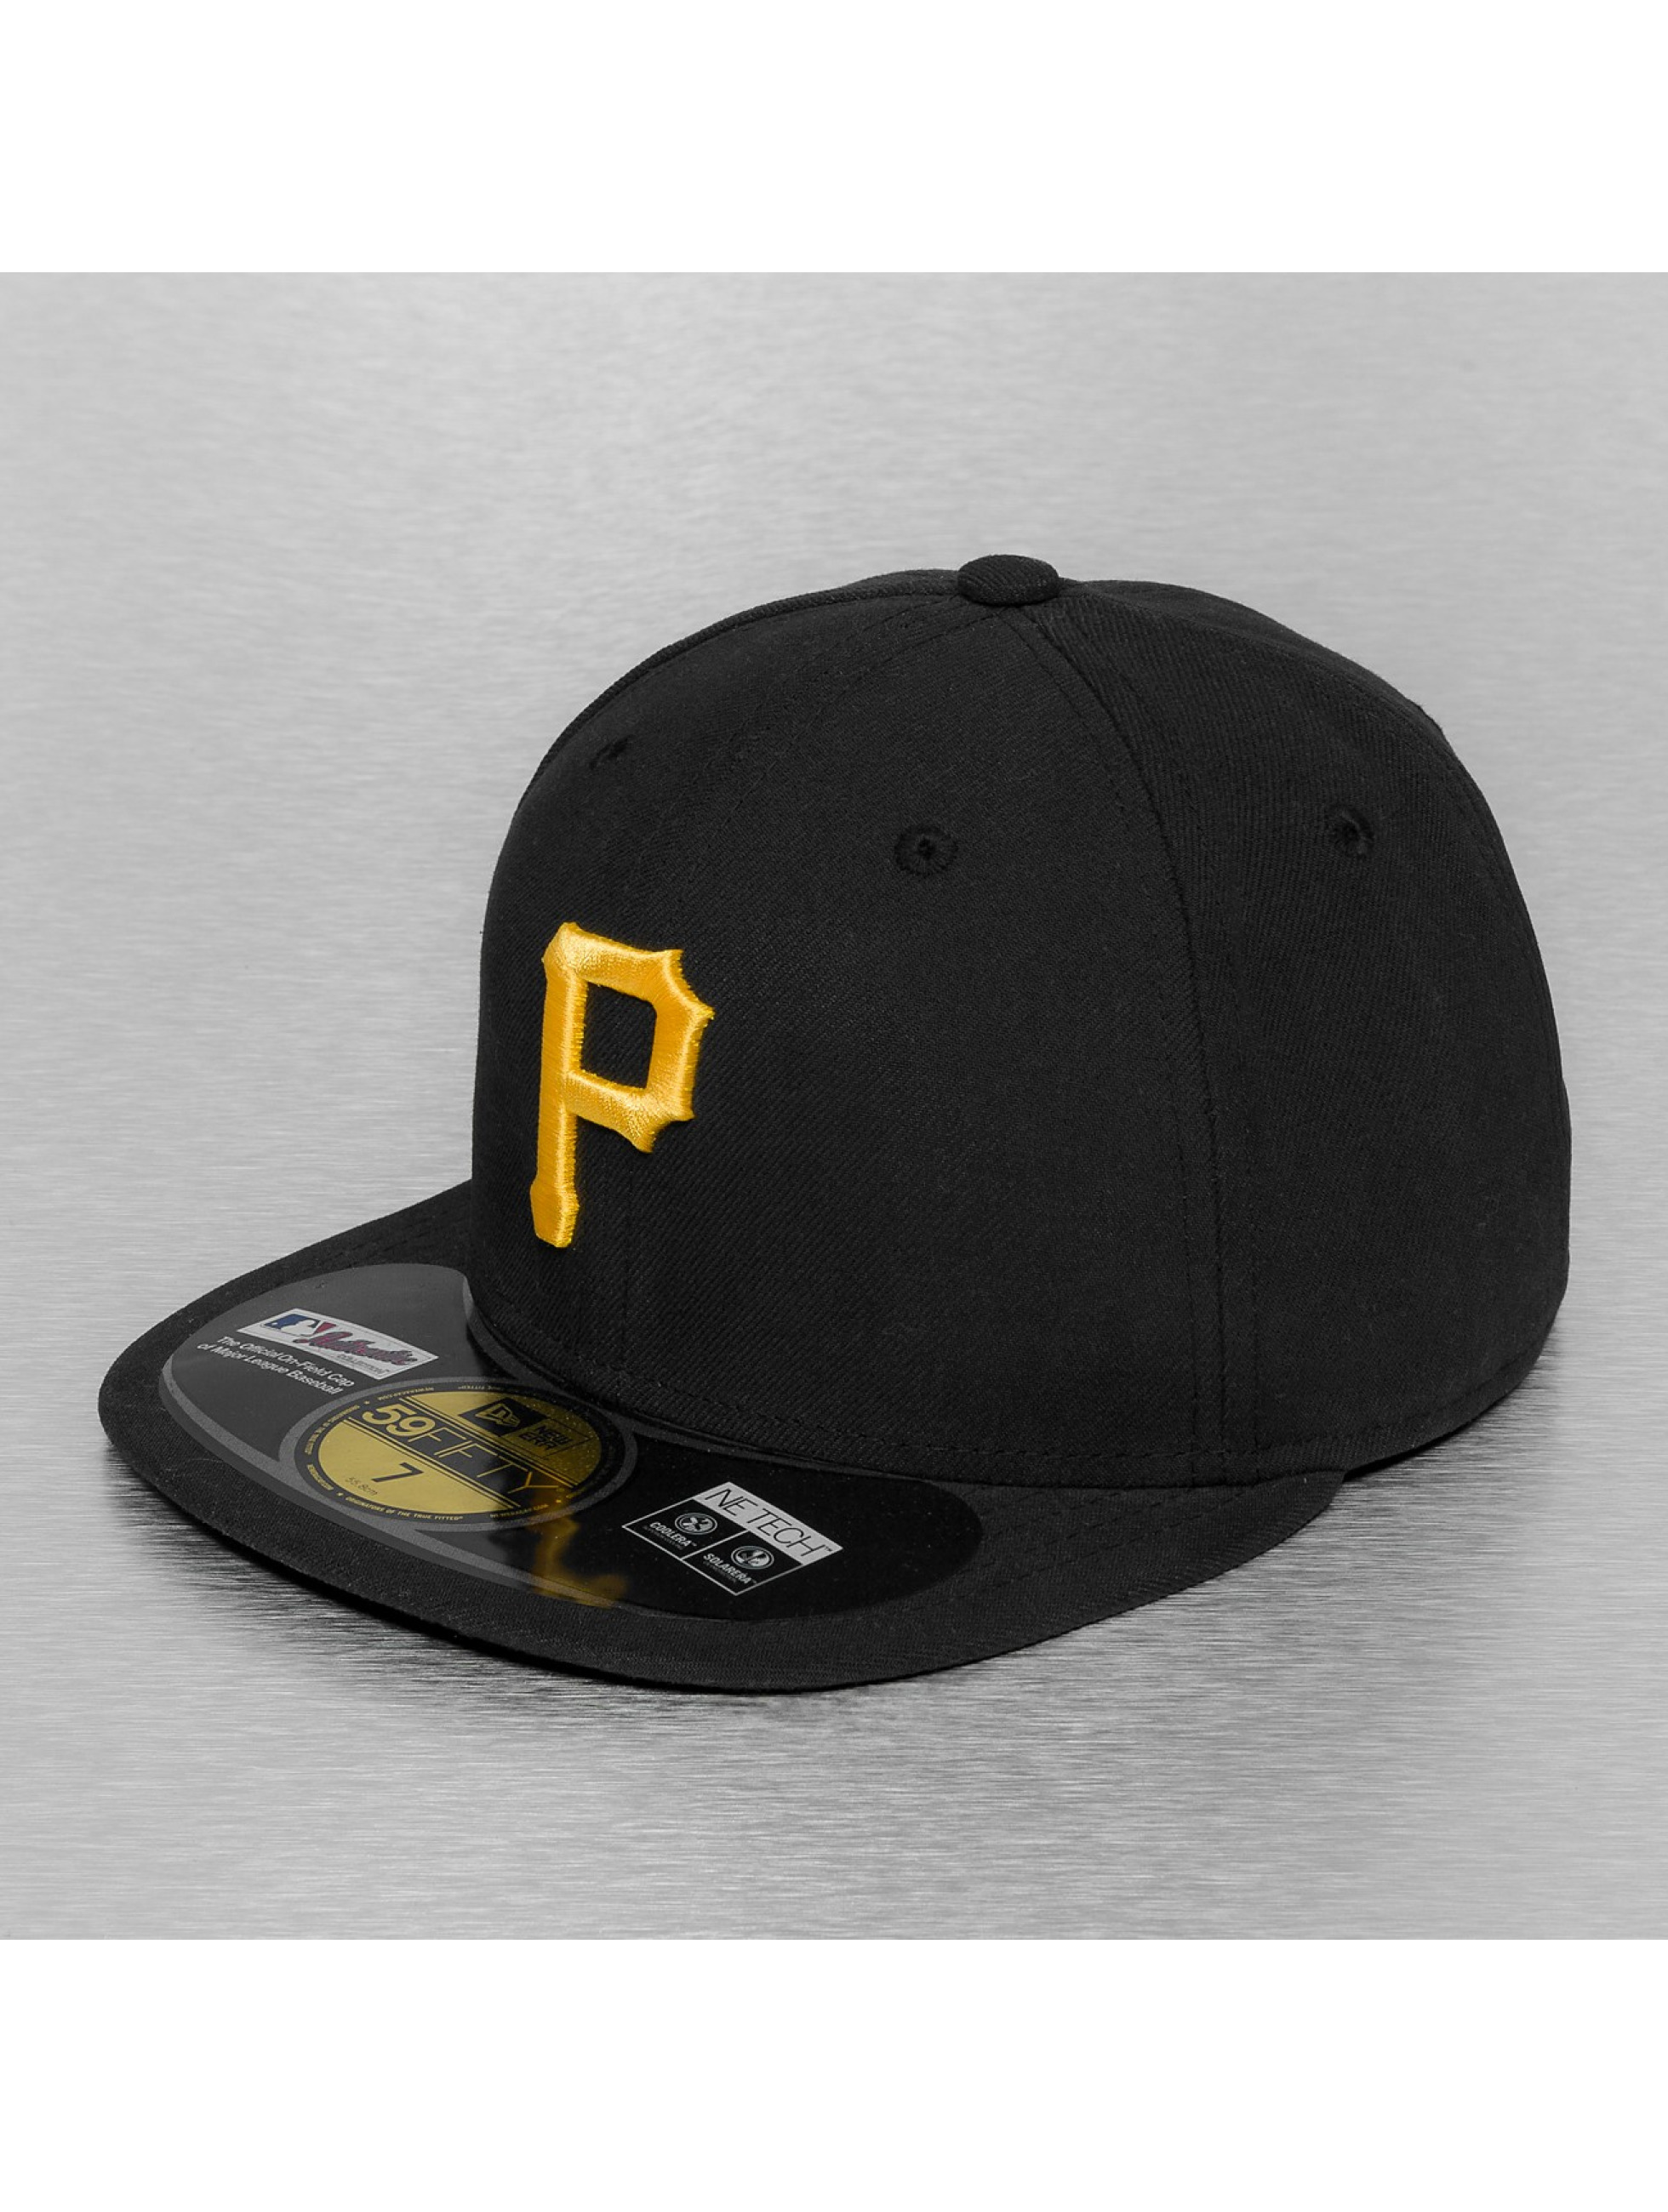 New Era Casquette / Fitted Authentic Performance Pittsburgh Pirates 59Fifty en noir